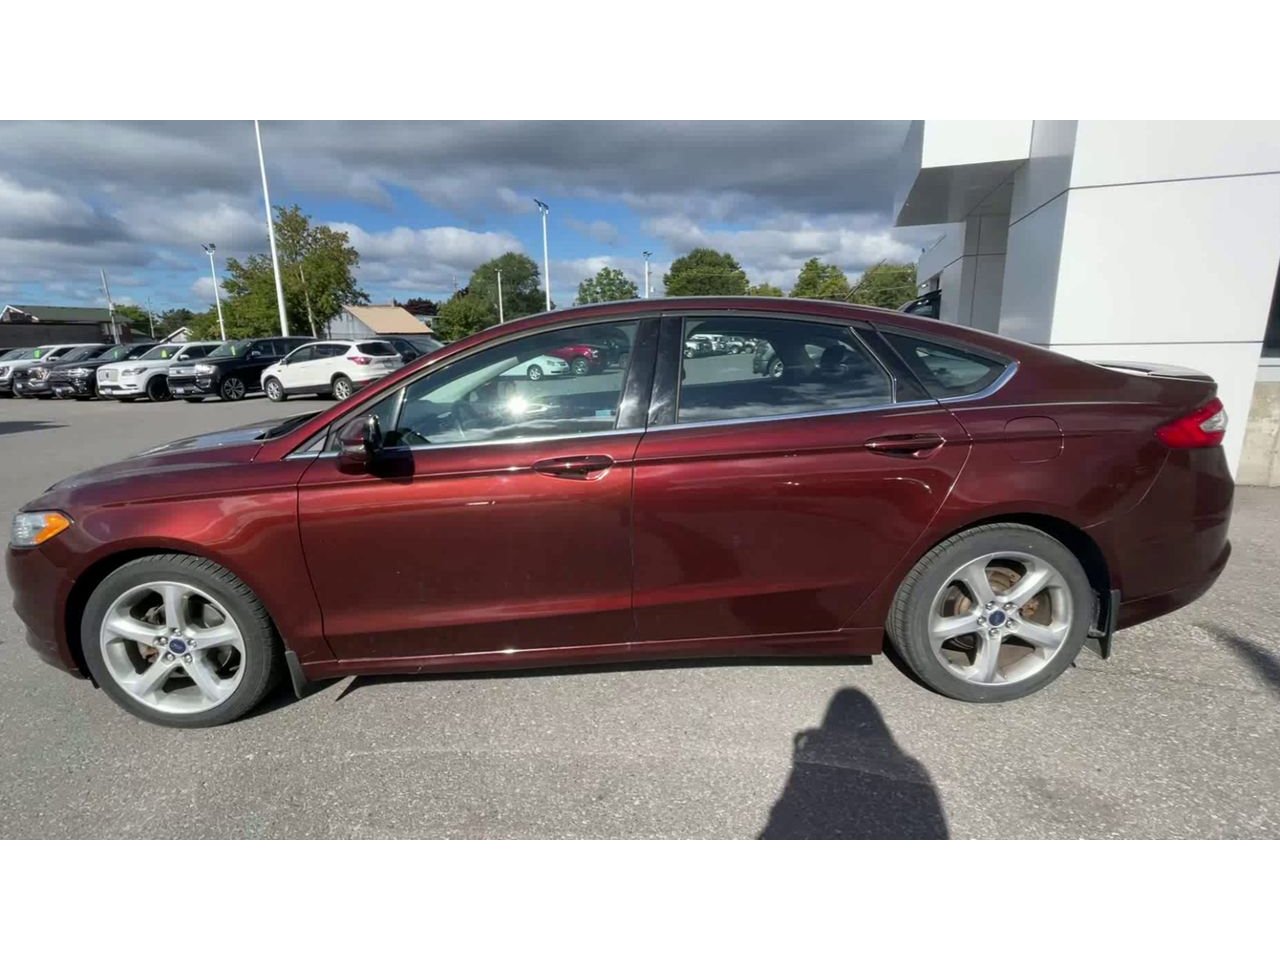 2016 Ford Fusion - P21337 Full Image 5